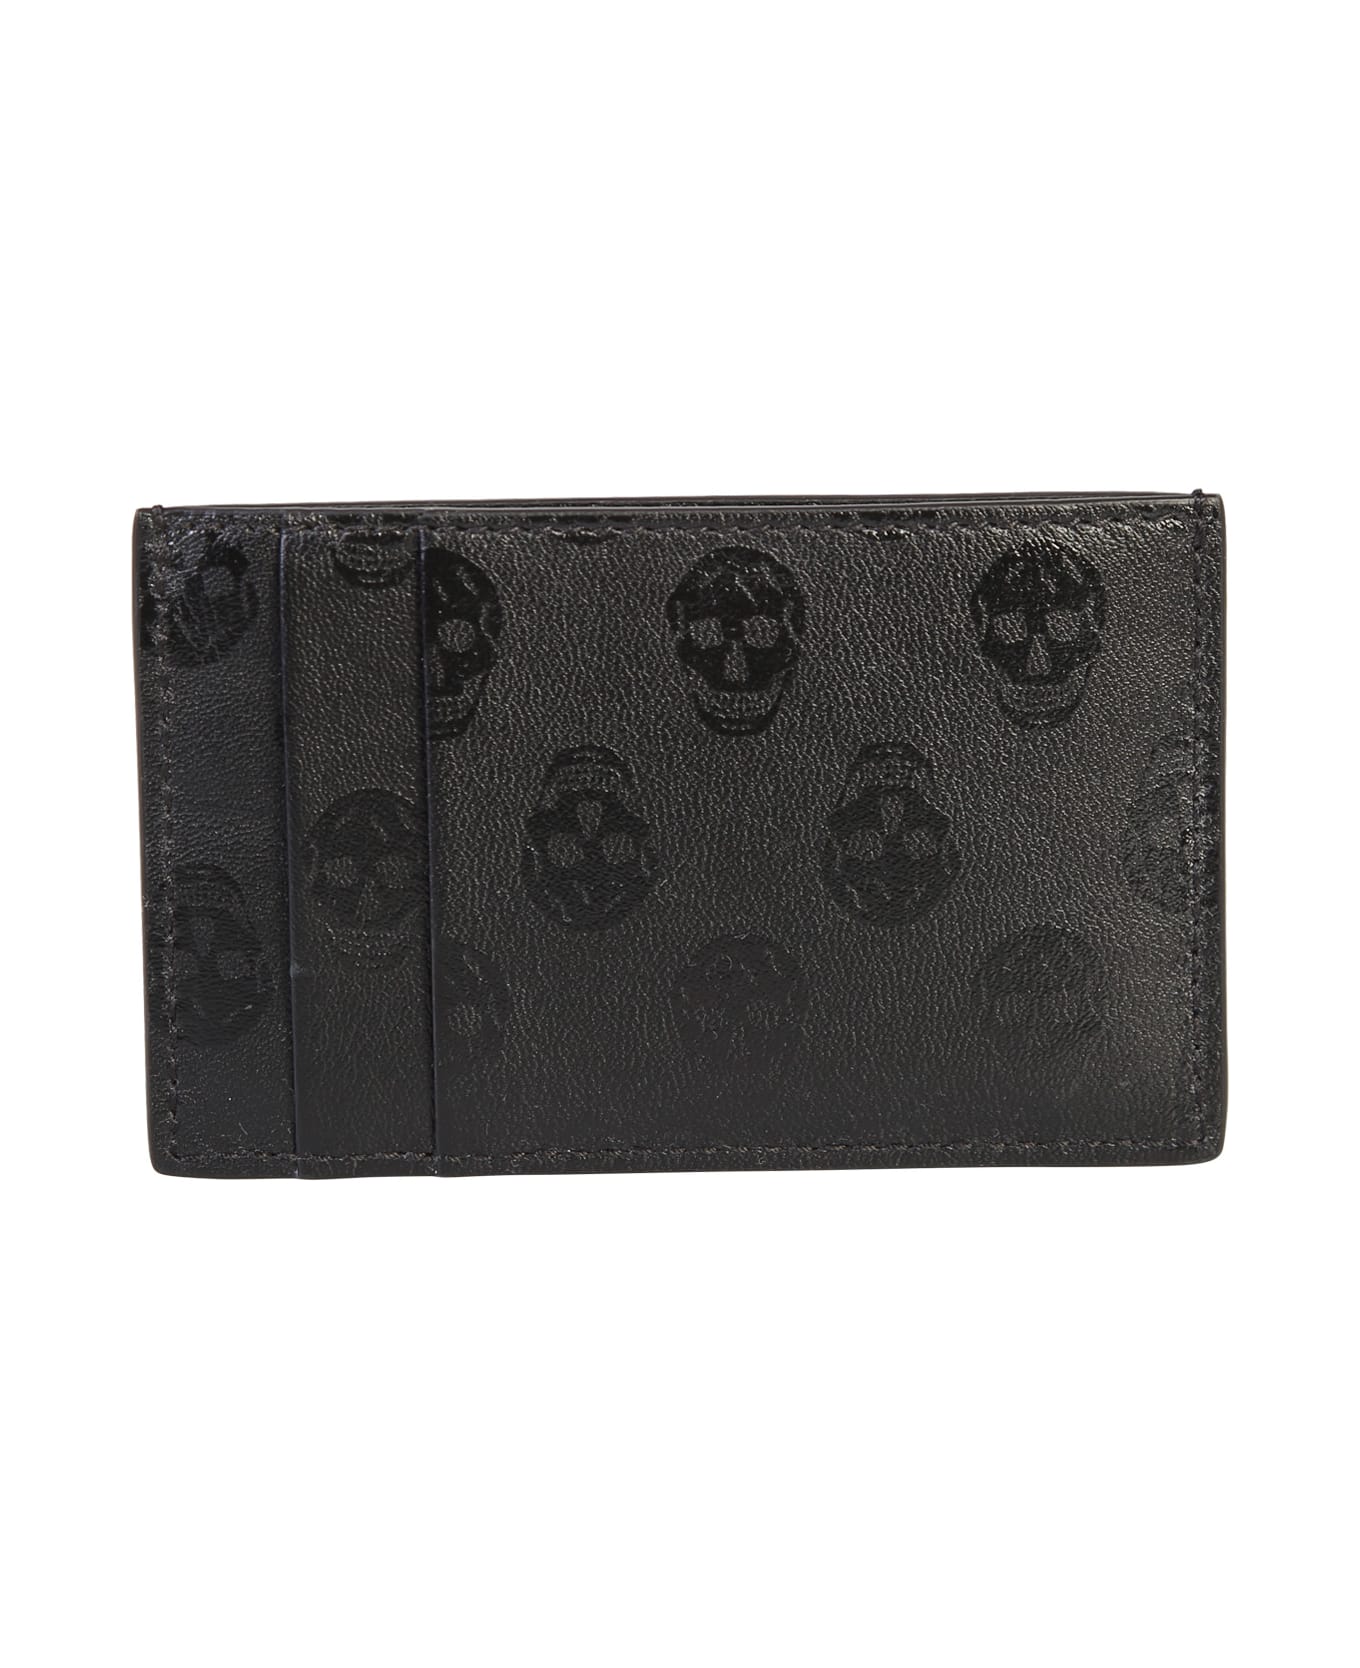 Alexander McQueen Leather Card Holder With Iconic Biker Skull Print - Black